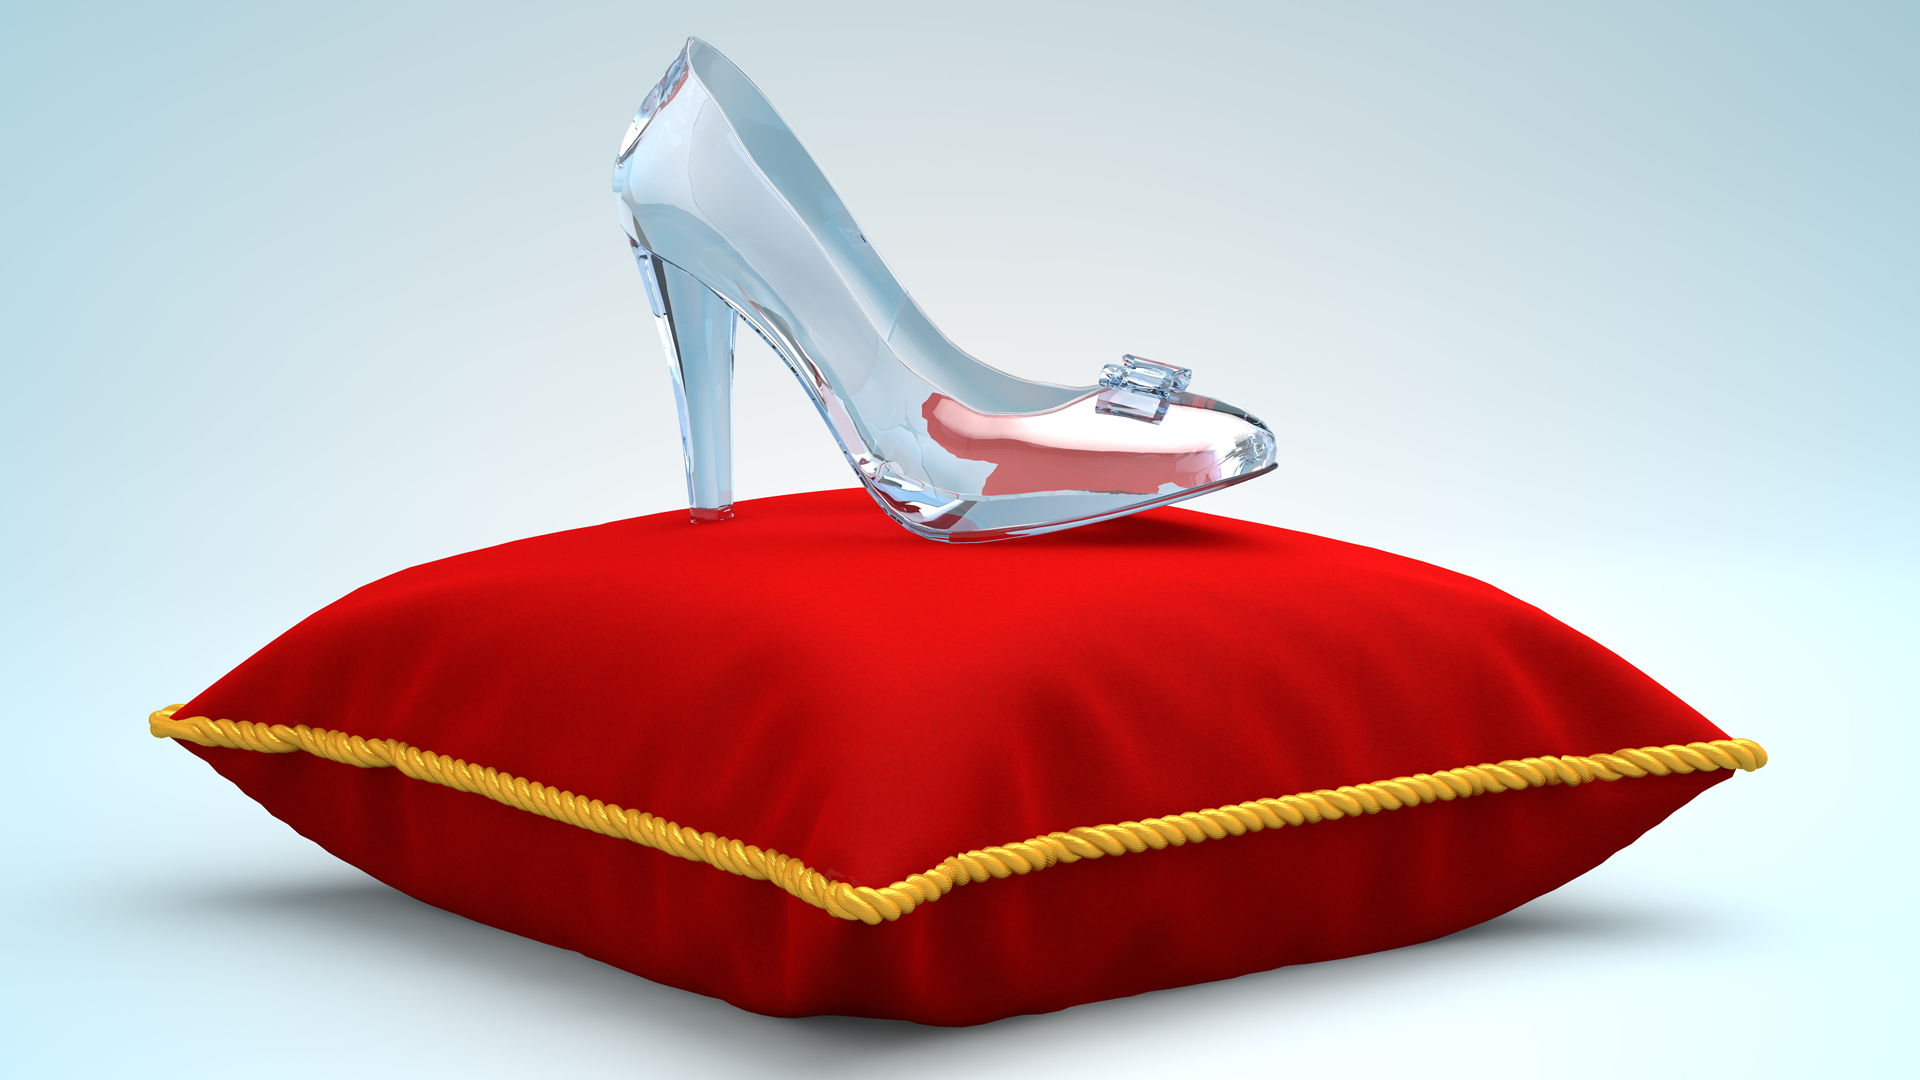 Finding The Glass Slipper For Your Creative